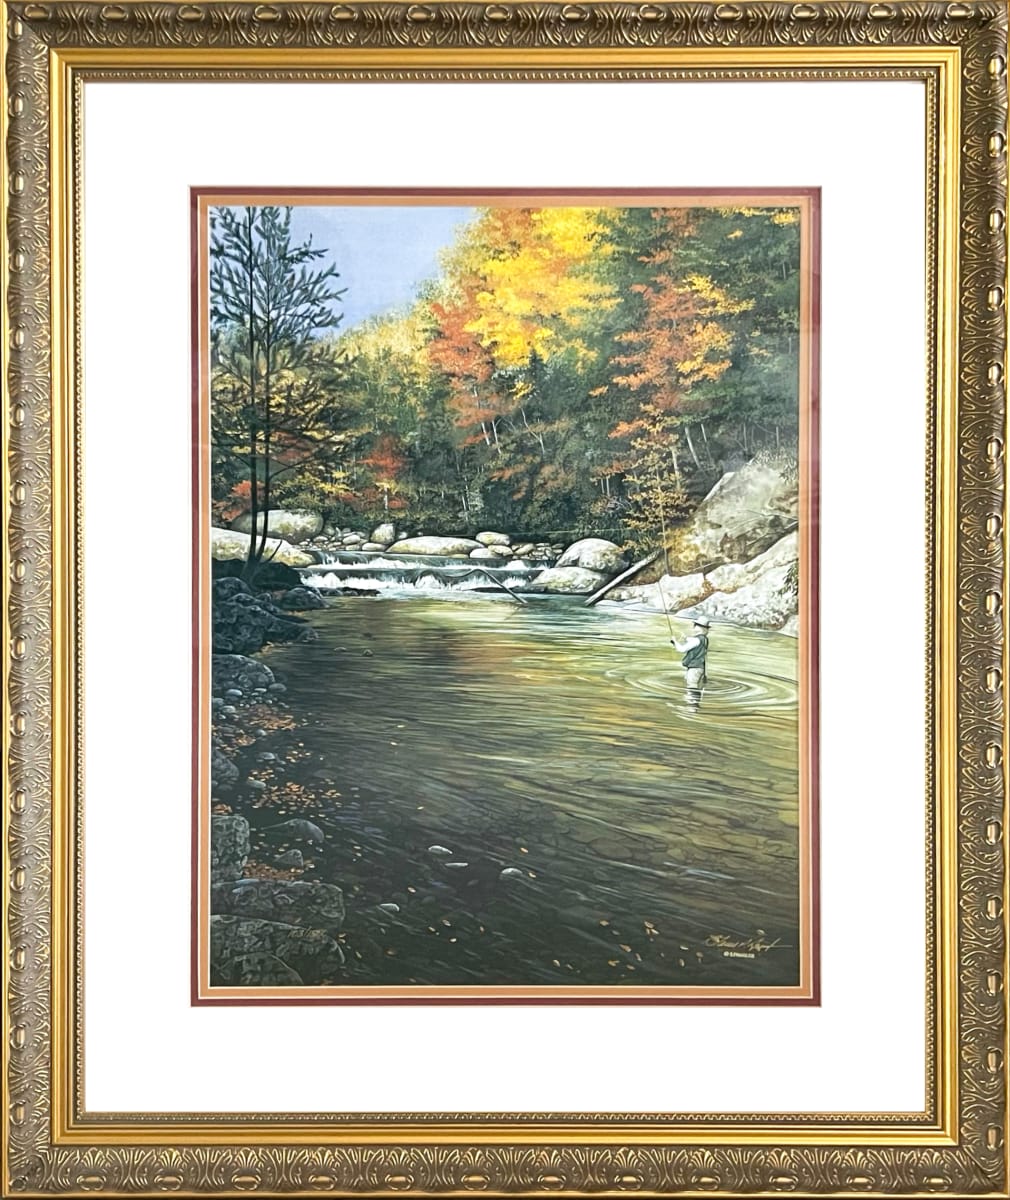 Fisherman - Lithograph Print (Limited Edition) by Steven P. Spangler  Image: Steven P. Spangler - Fisherman with matting and gold frame